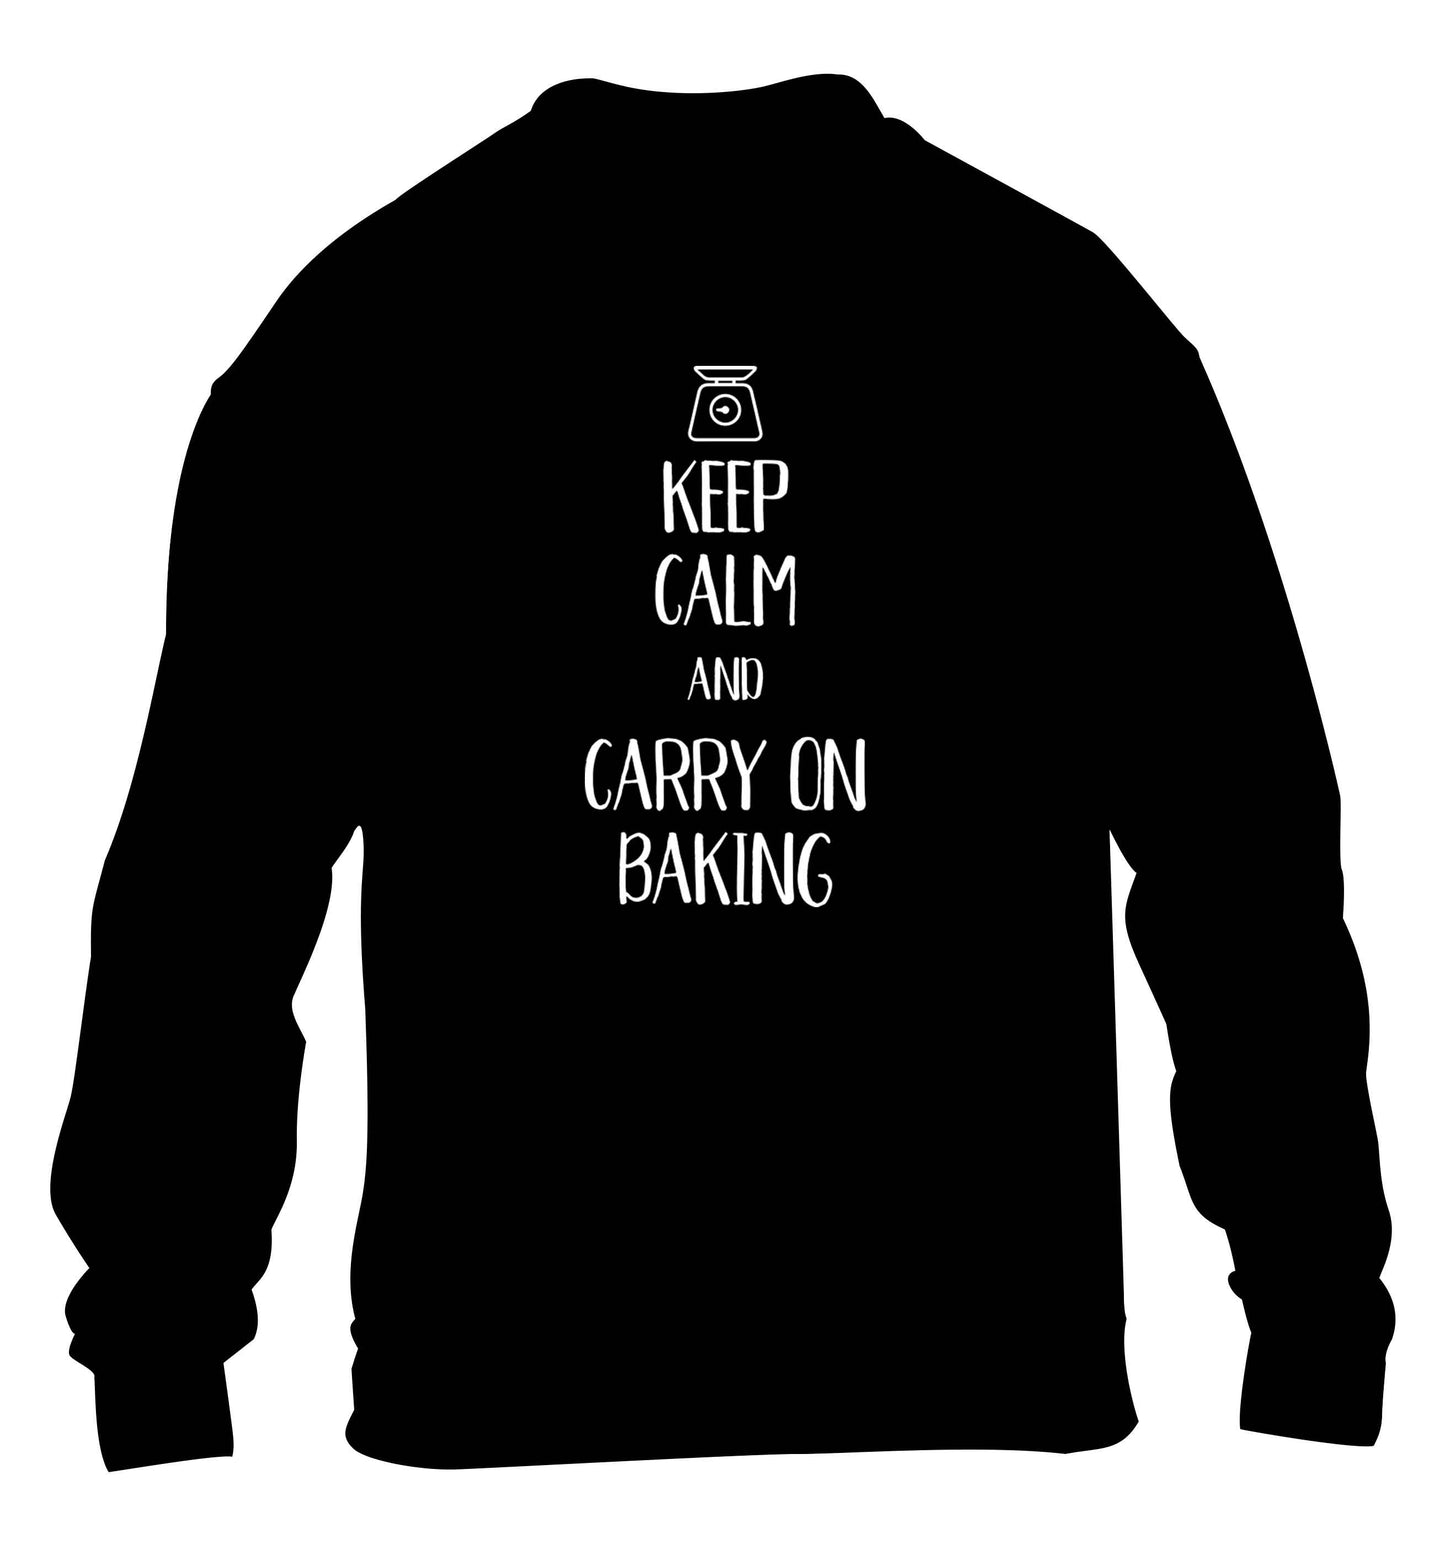 Keep calm and carry on baking children's black sweater 12-13 Years